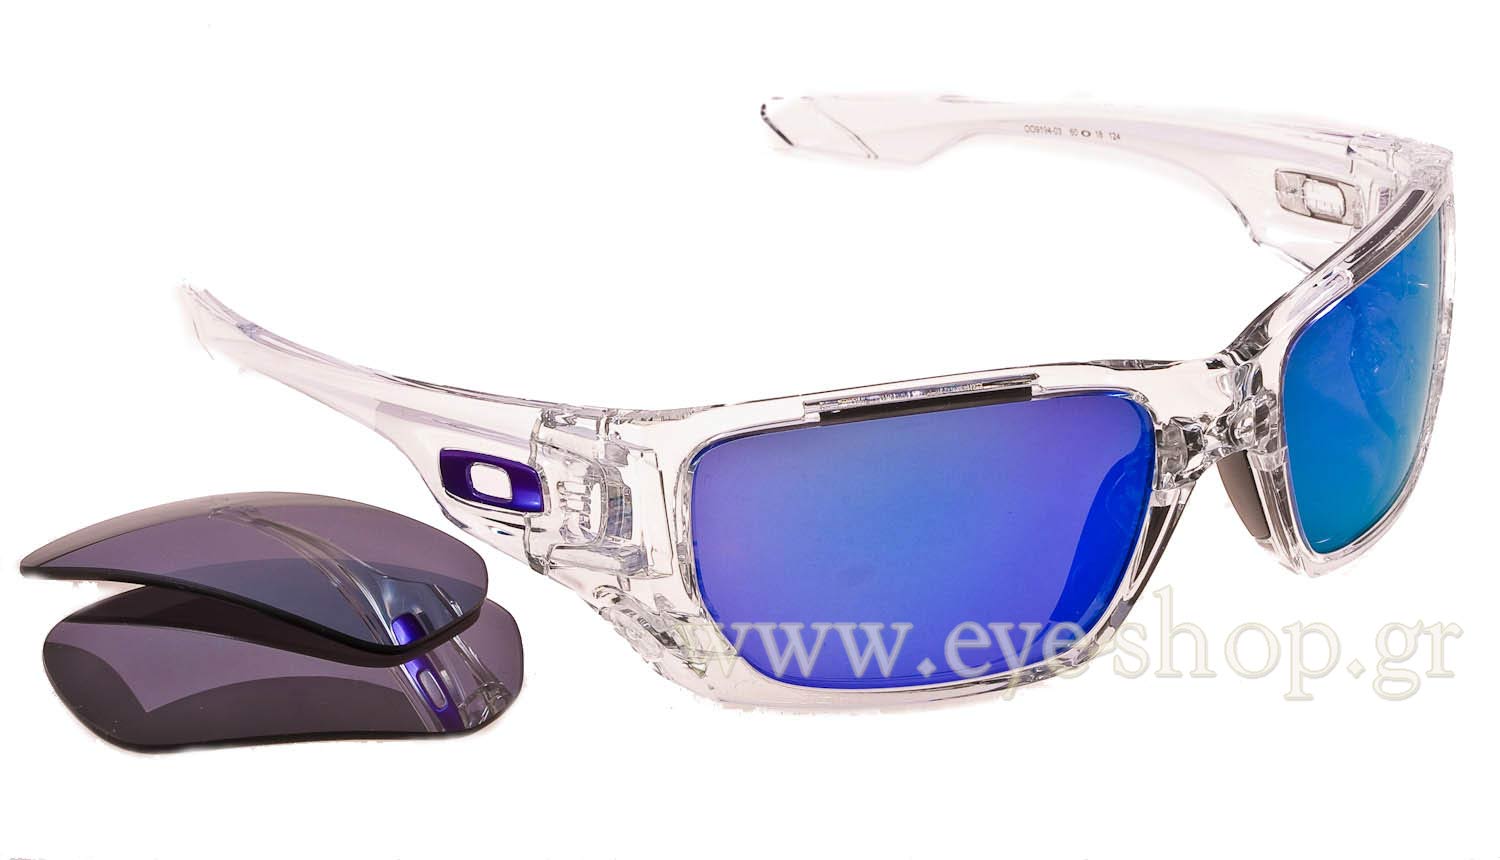 oakley style switch discontinued